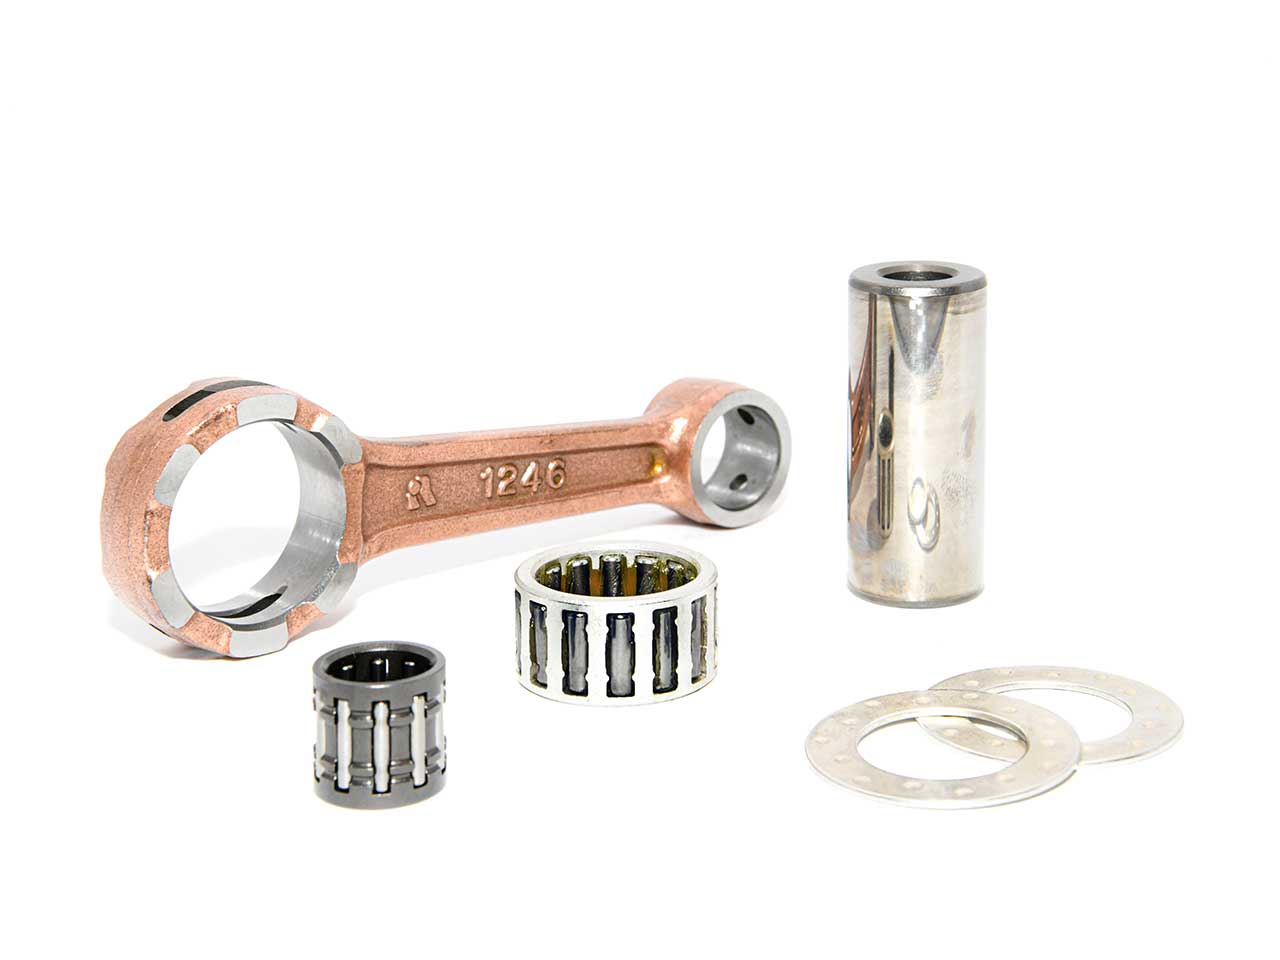 Order original Barikit moped connecting rods, connecting rods and